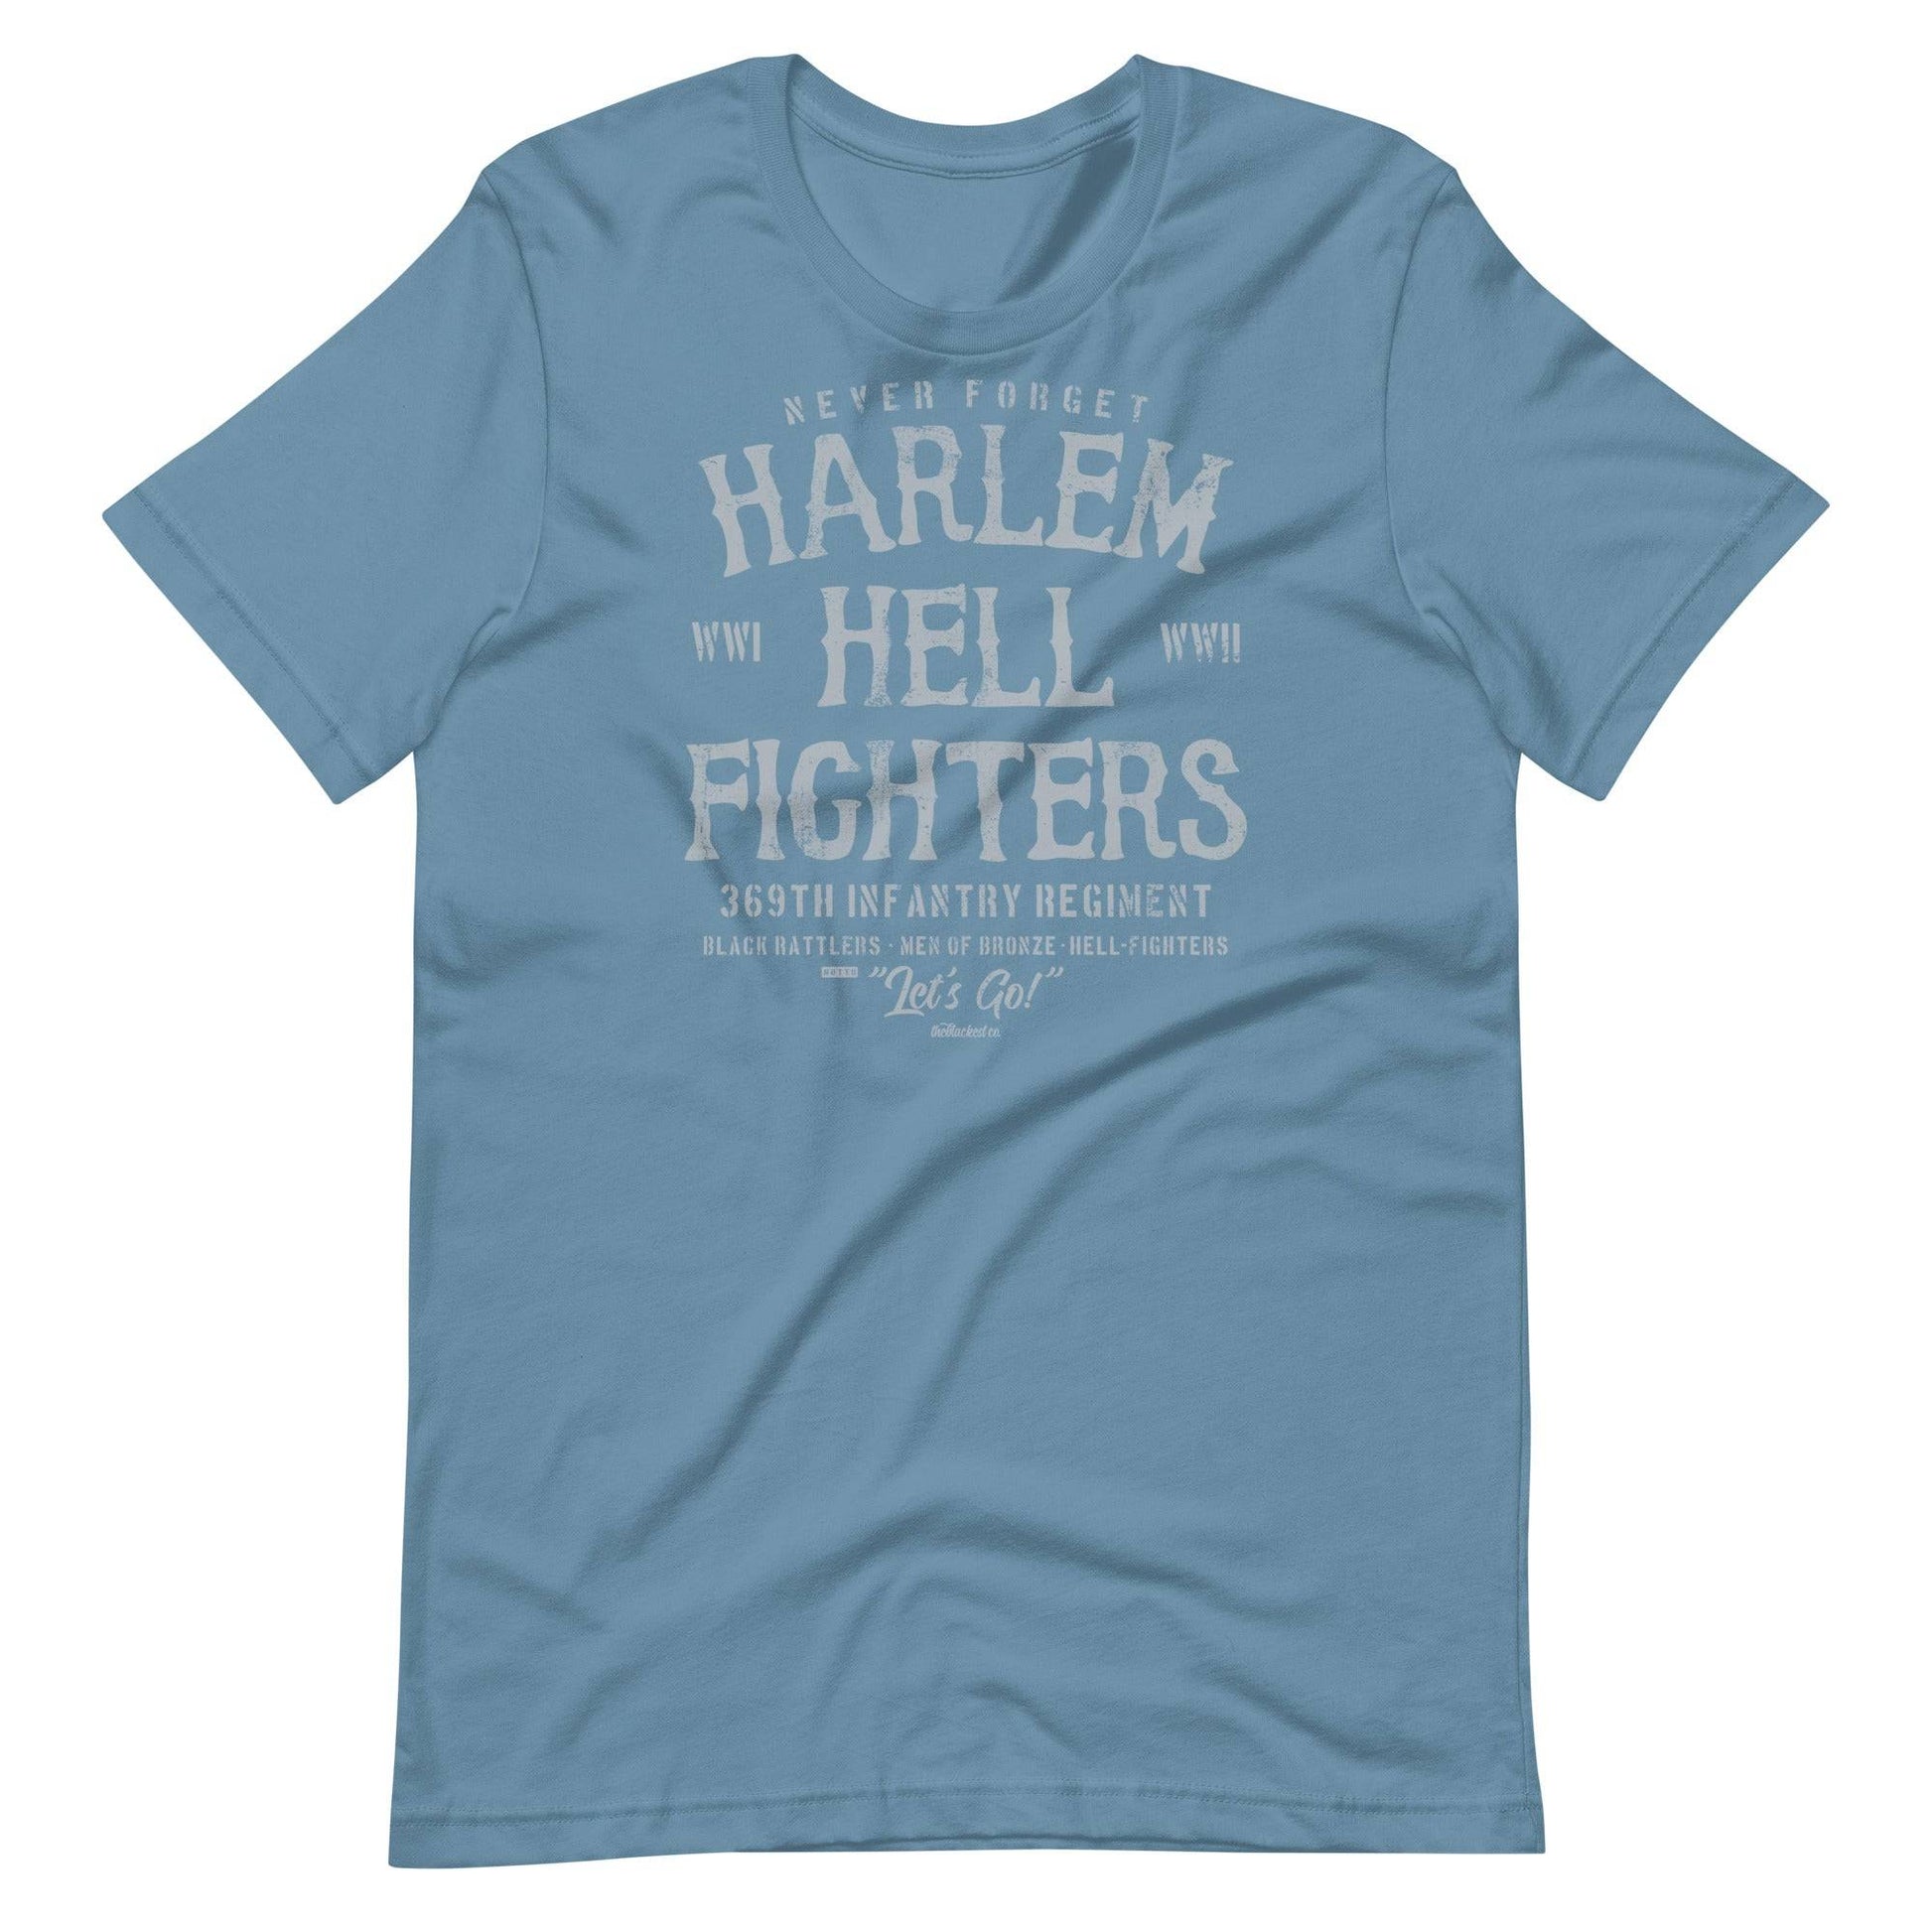 denim blue t shirt with white text that reads harlem hellfighters wwi and wwii